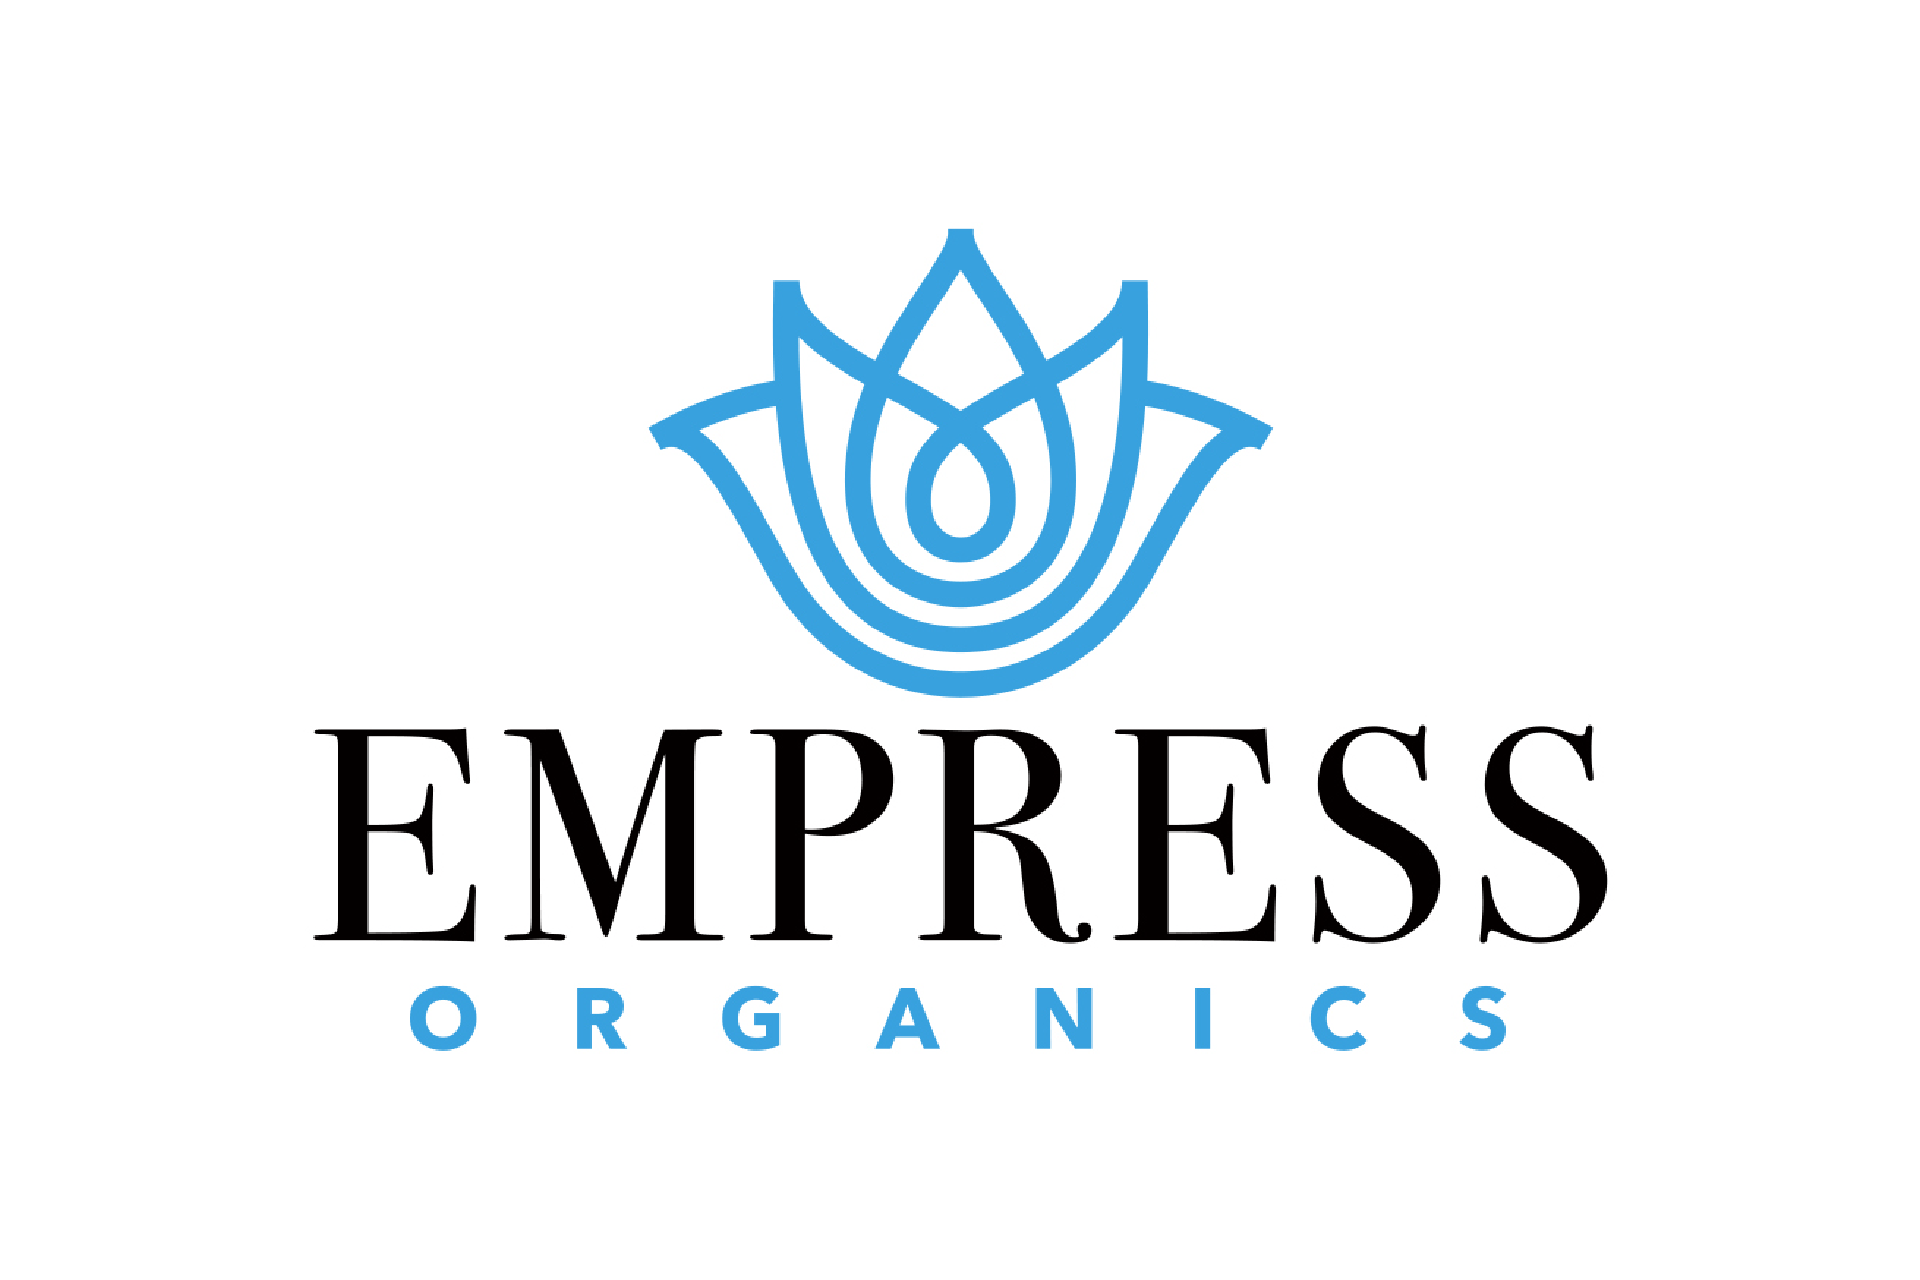 Empress Organics - During menstruation, the body sheds tissue and